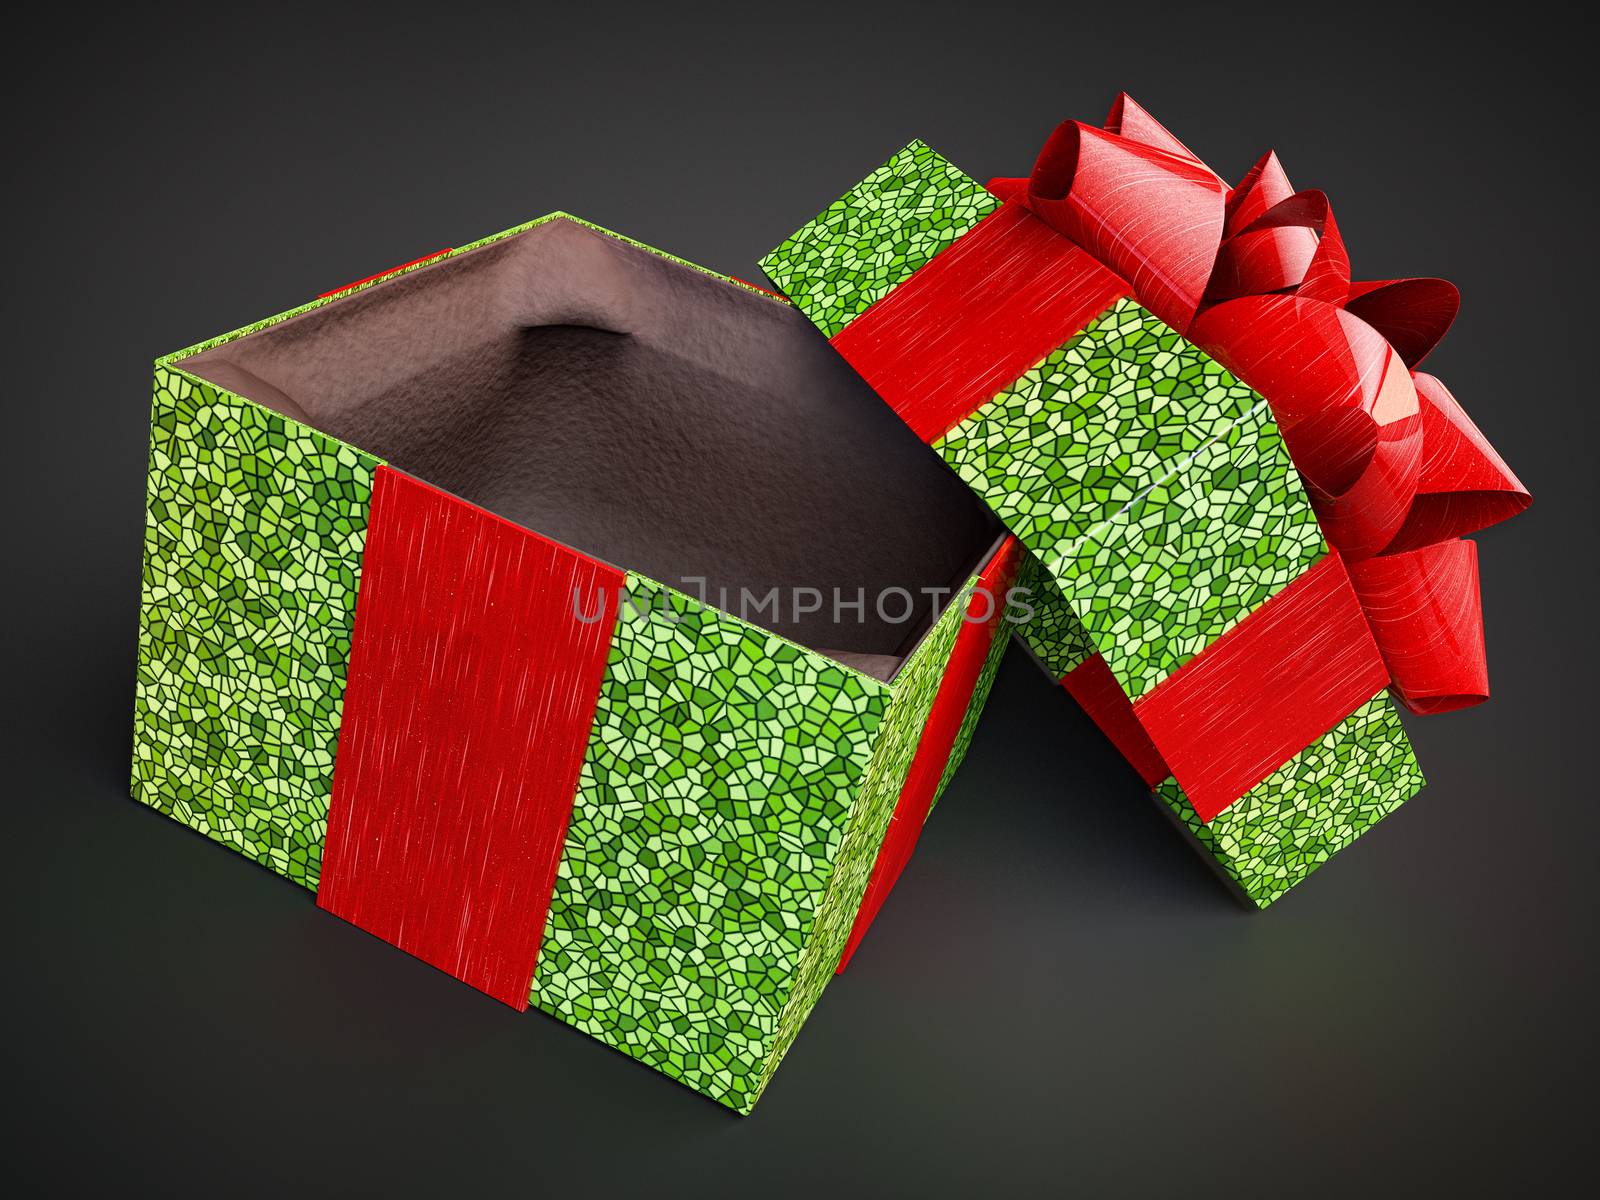 green gift box with mosaic pattern opened on dark background. present, presentation, bounty, donative, pledge removed opened cover red bow-knot ribbon isolated on black high perspective view